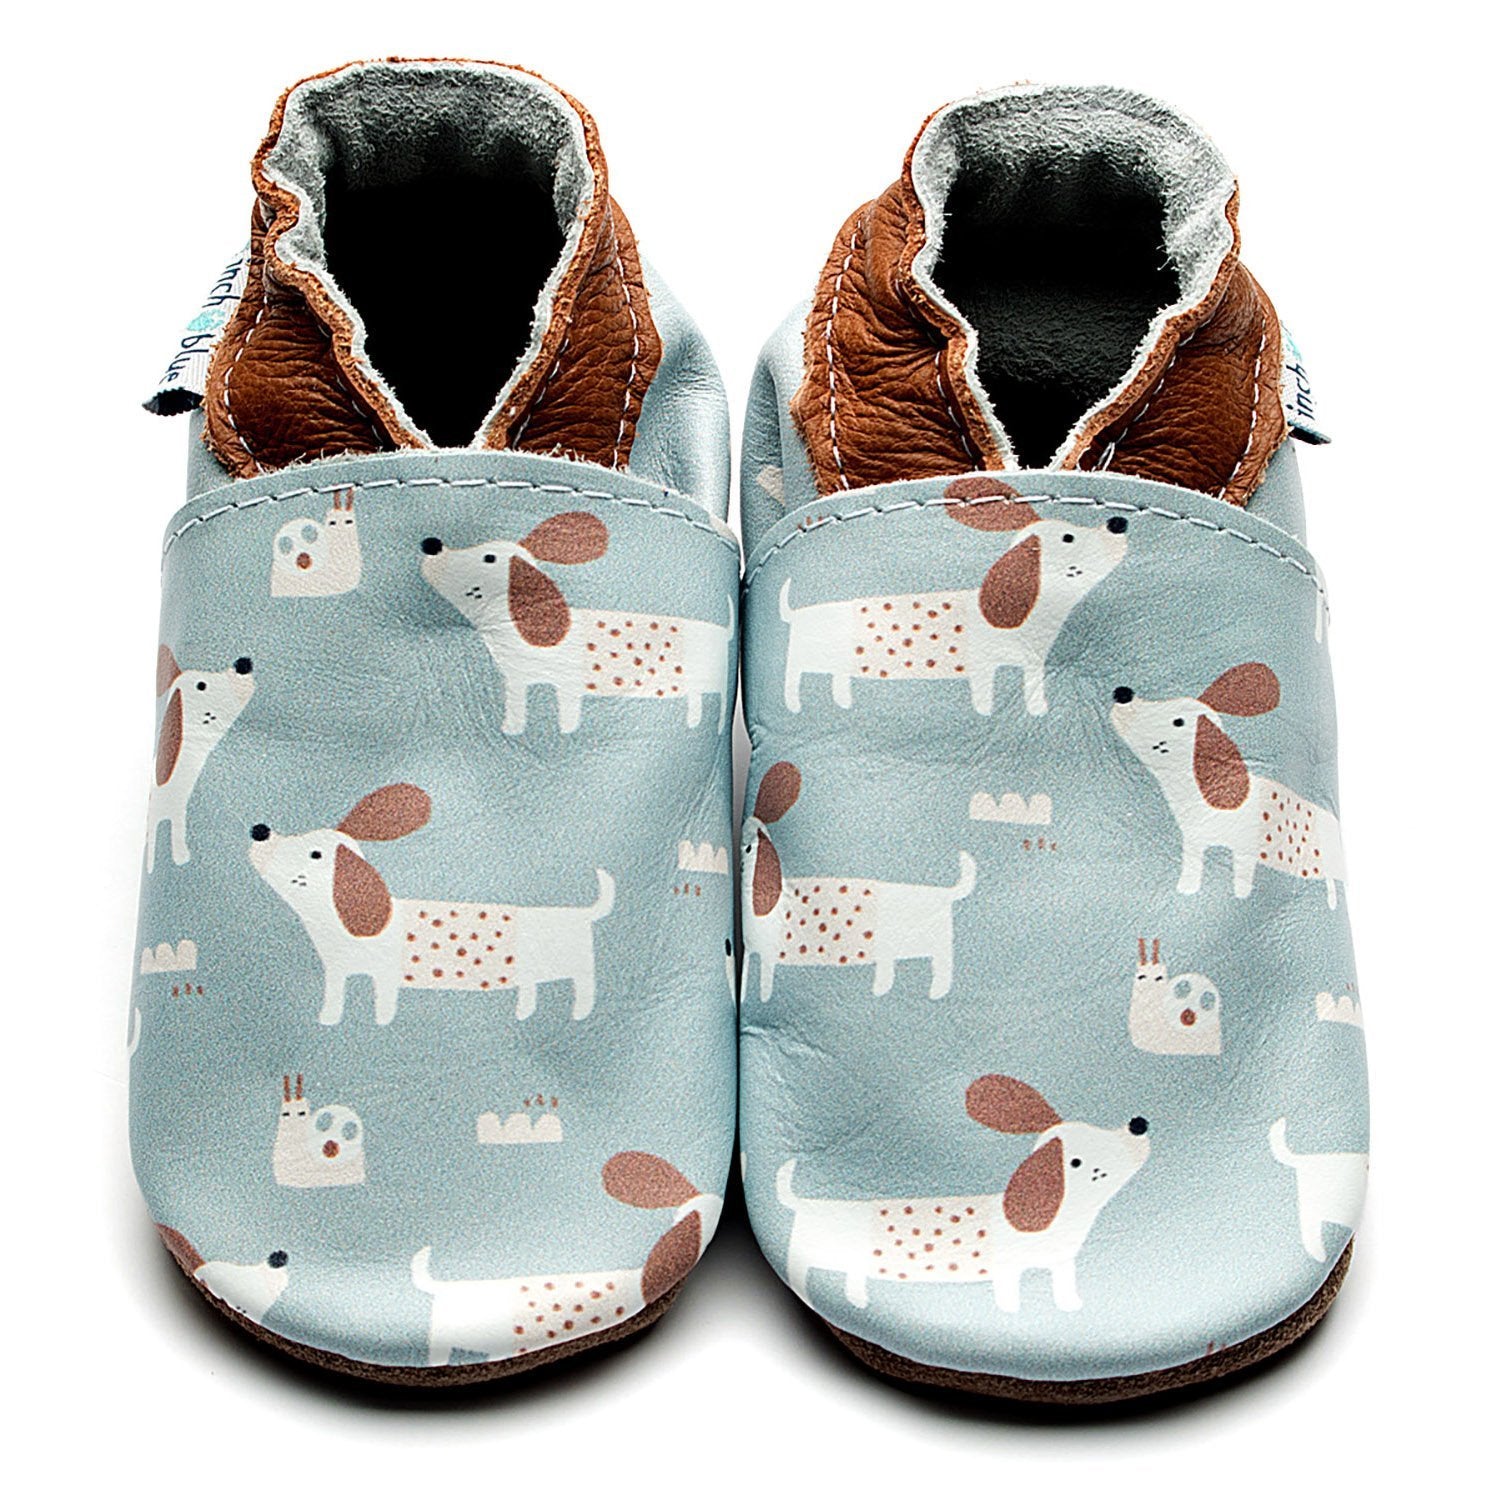 Handmade baby shoes with dog prints in duck egg blue and brown